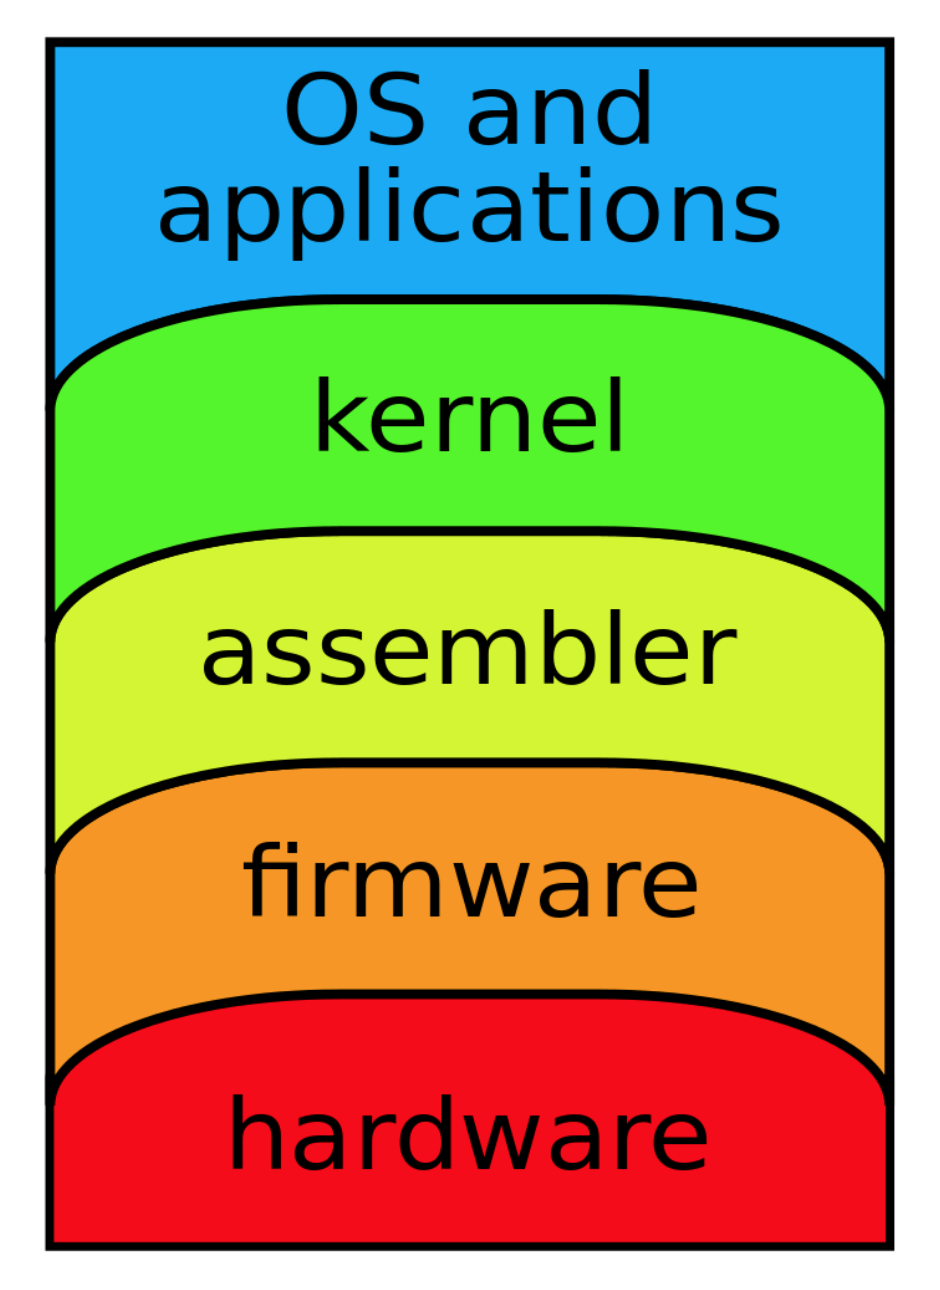 Components of the OS